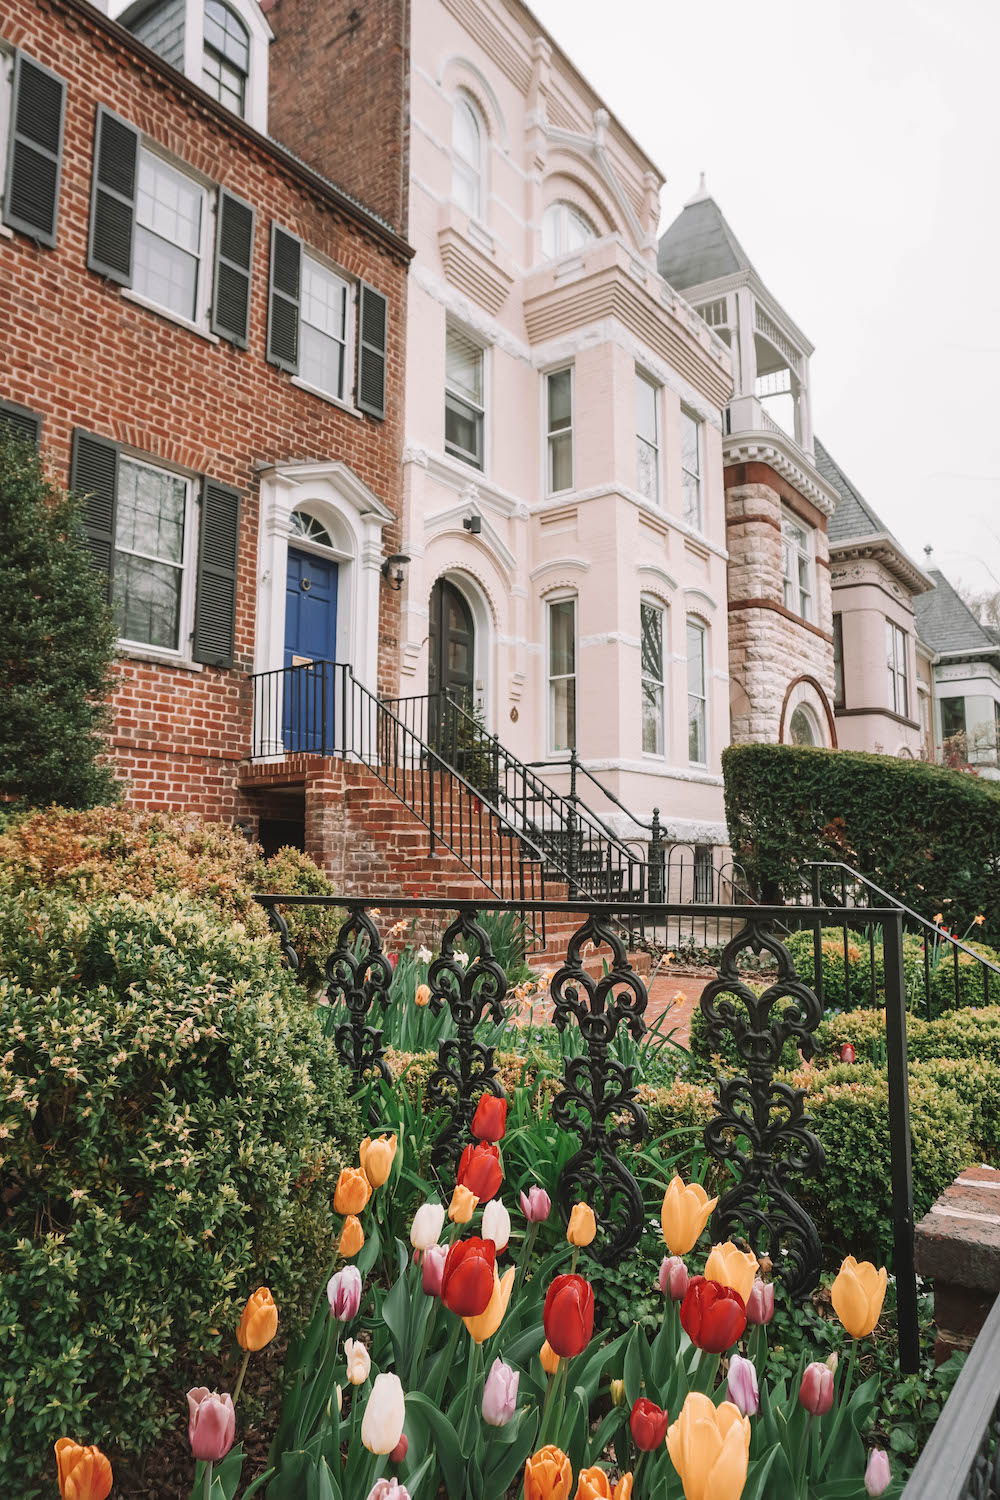 View of row houses in Georgetown DC, with colorful tulips in the foreground. 